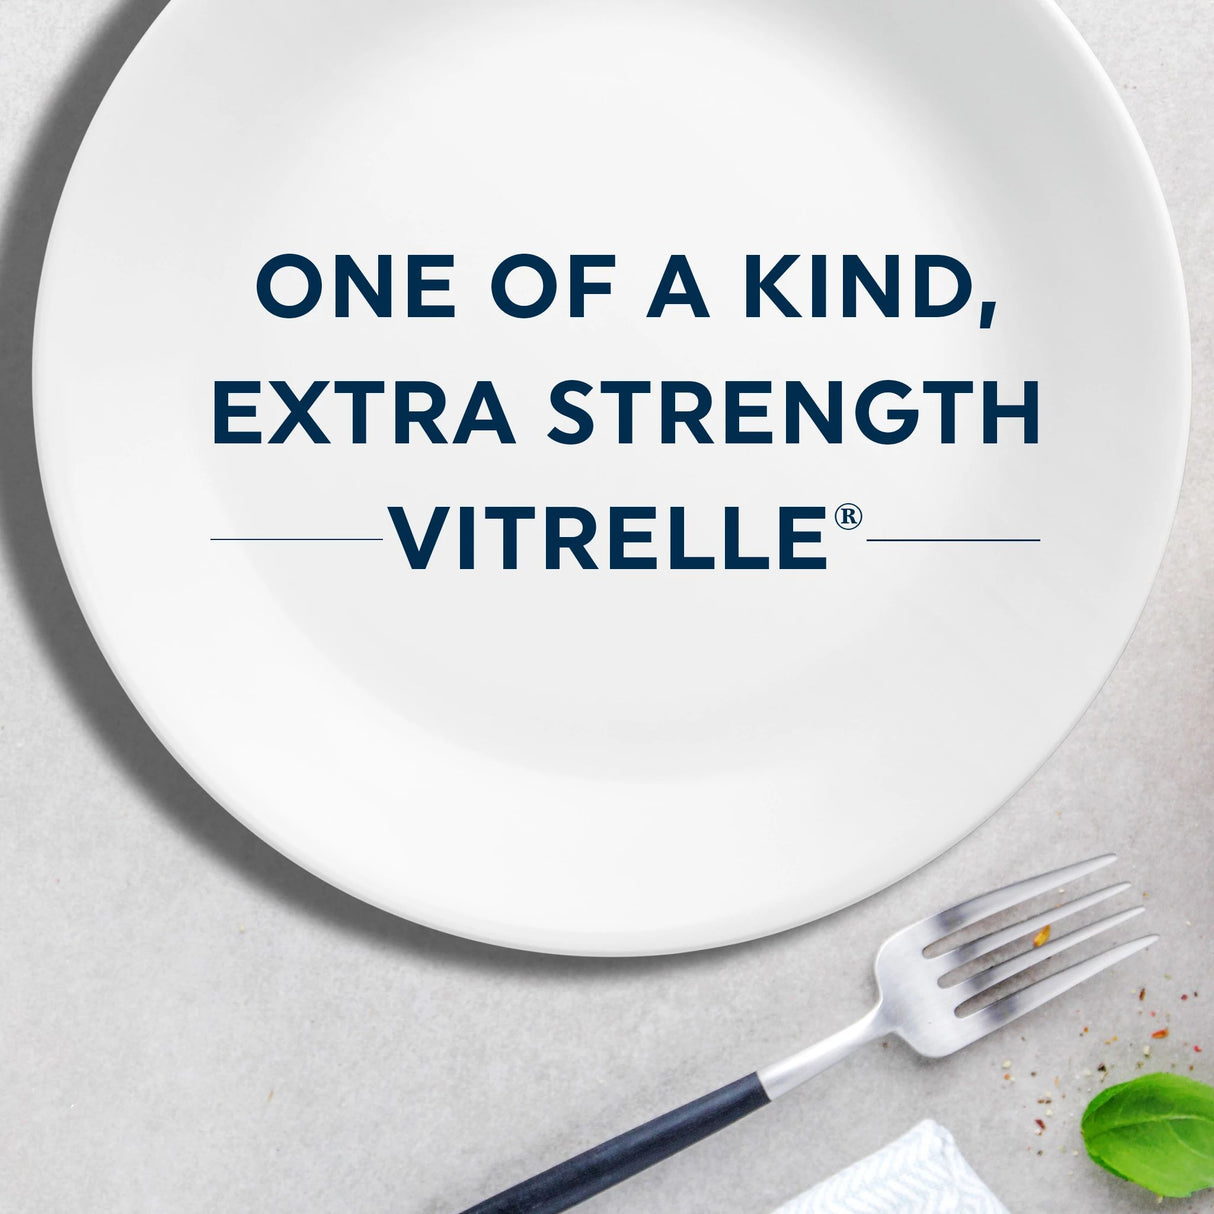  Corelle dinnerplate with text one of a kind extra strength Vitrelle